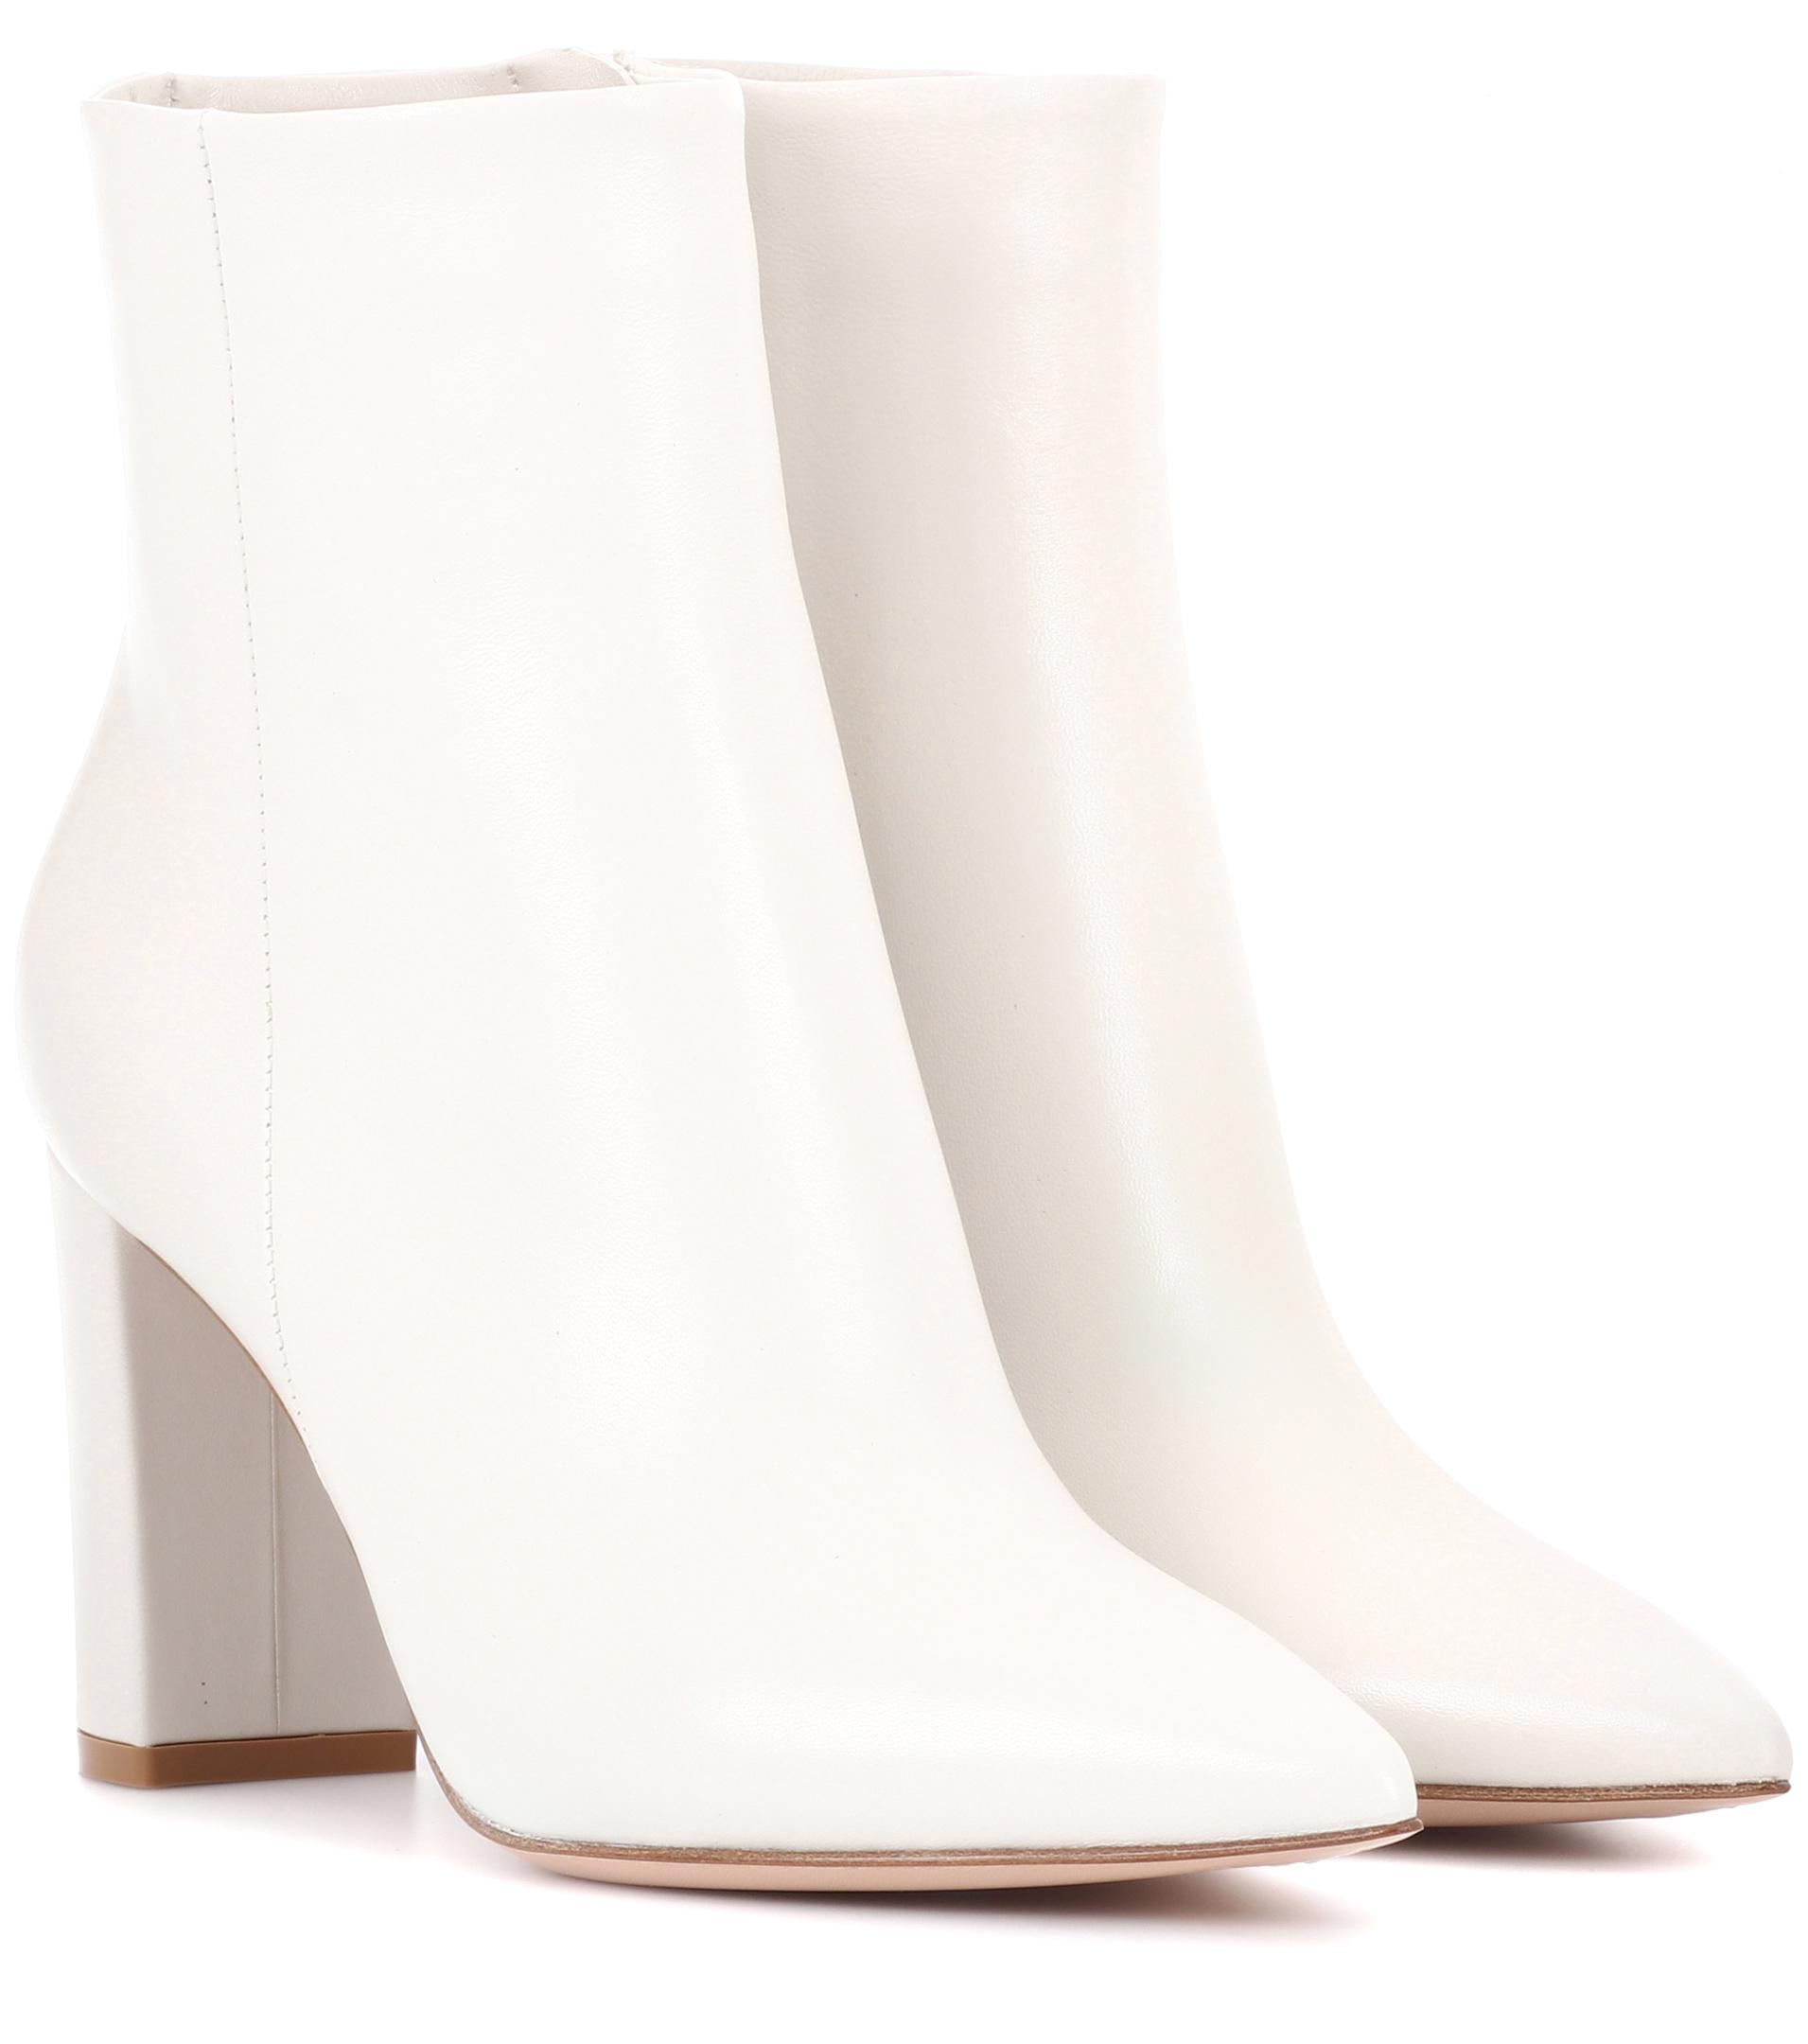 gianvito rossi white ankle boots